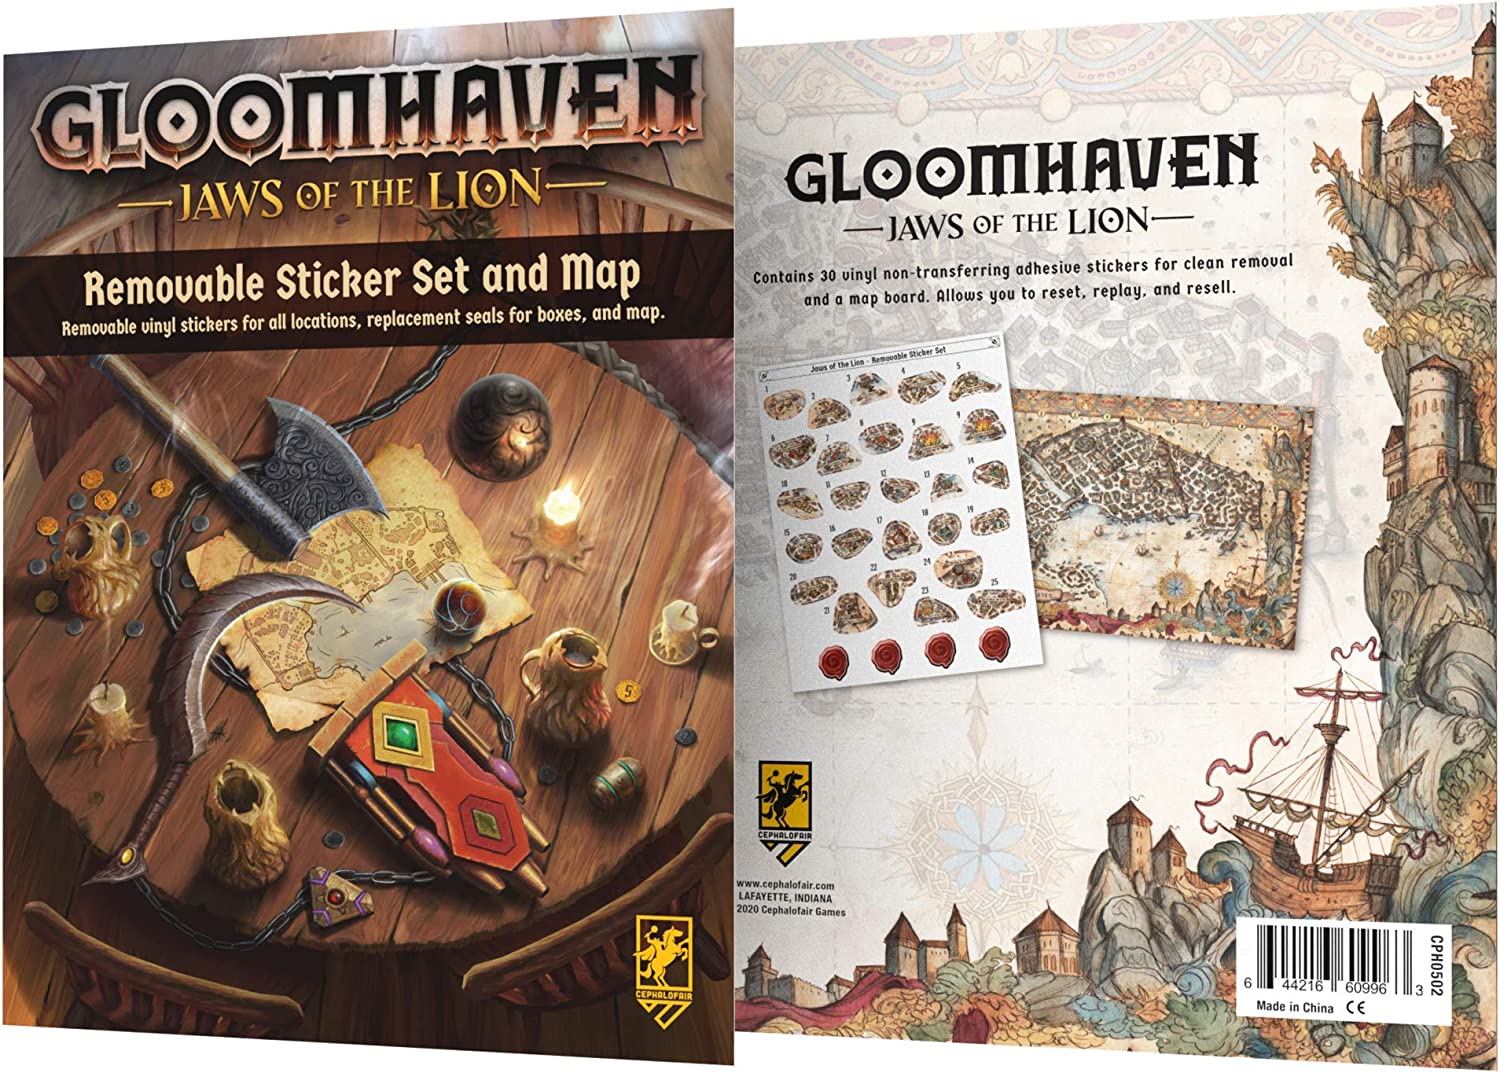 Køb Gloomhaven: Jaws of the Lion - Removable Sticker Set and Map - Pris 71.00 kr.